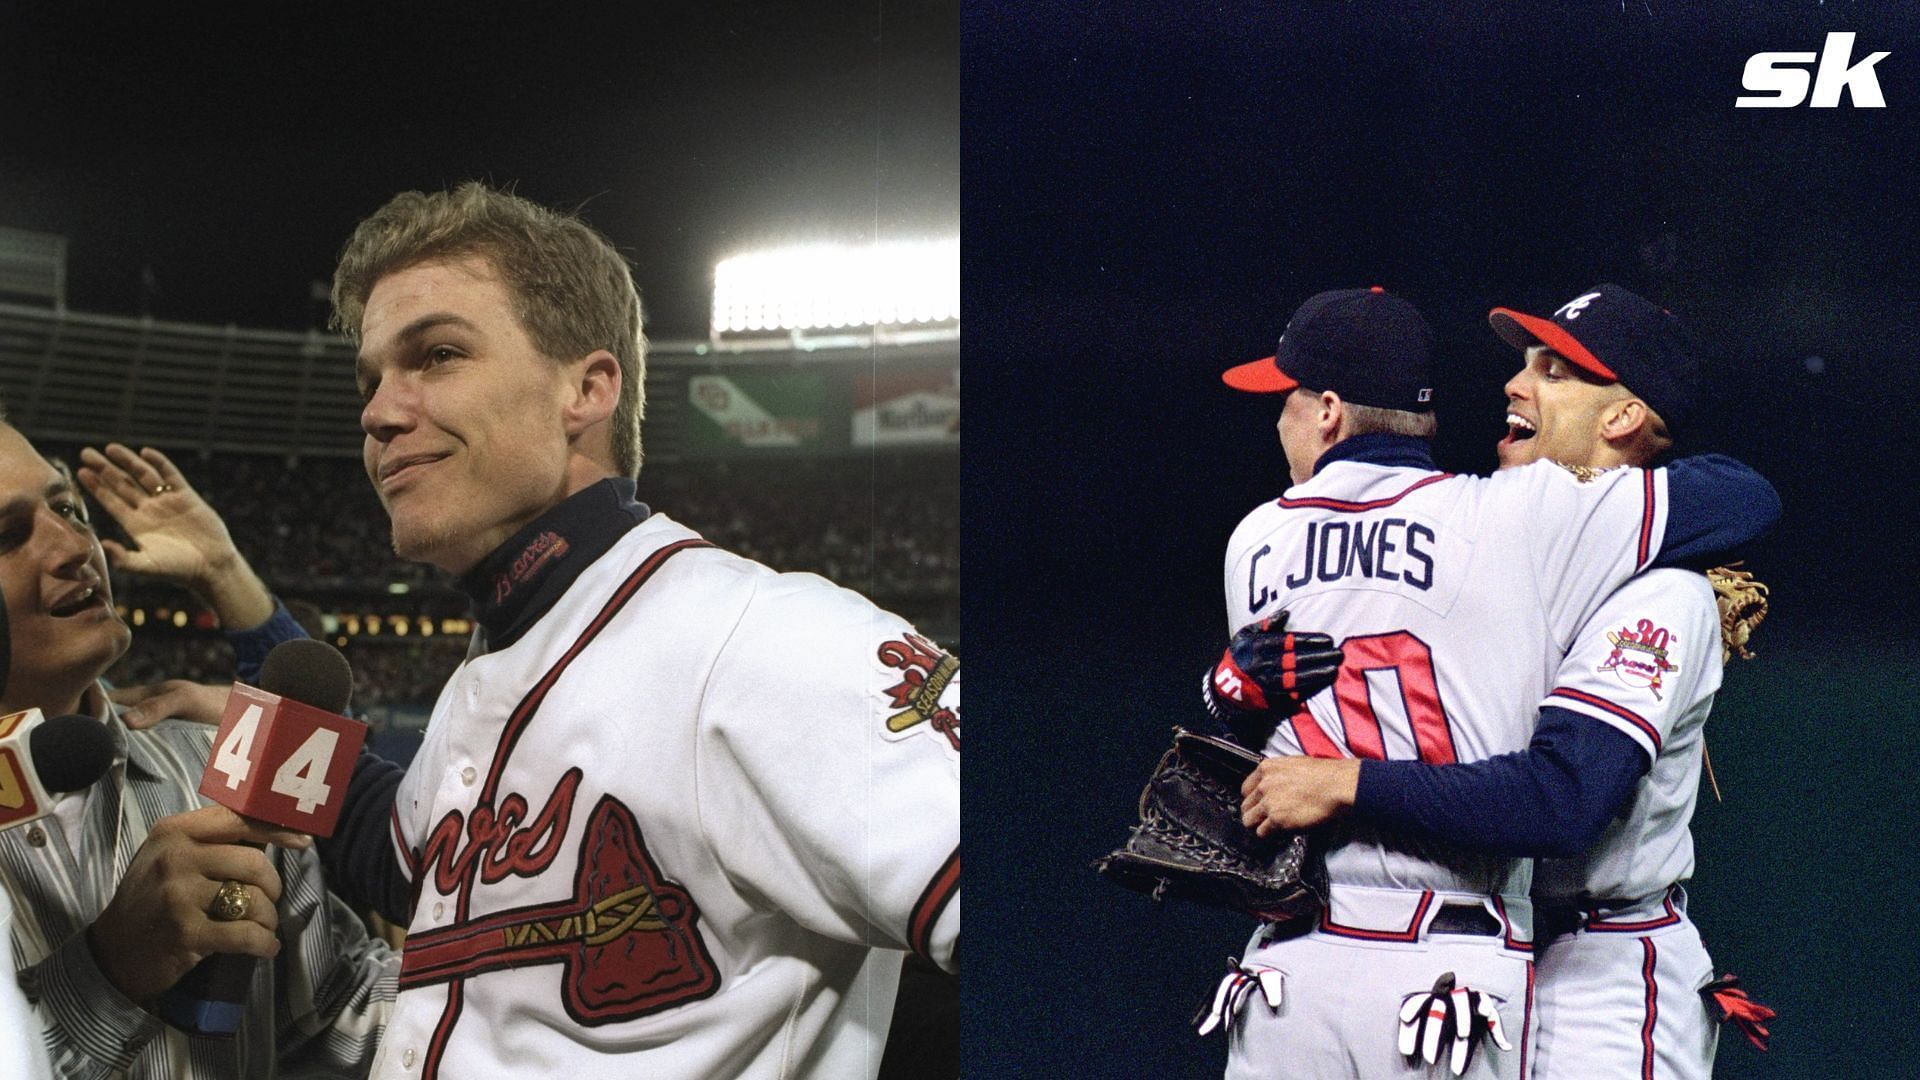 Chipper Jones pulled off an incredible rebound, which culminated in winning the 1995 World Series